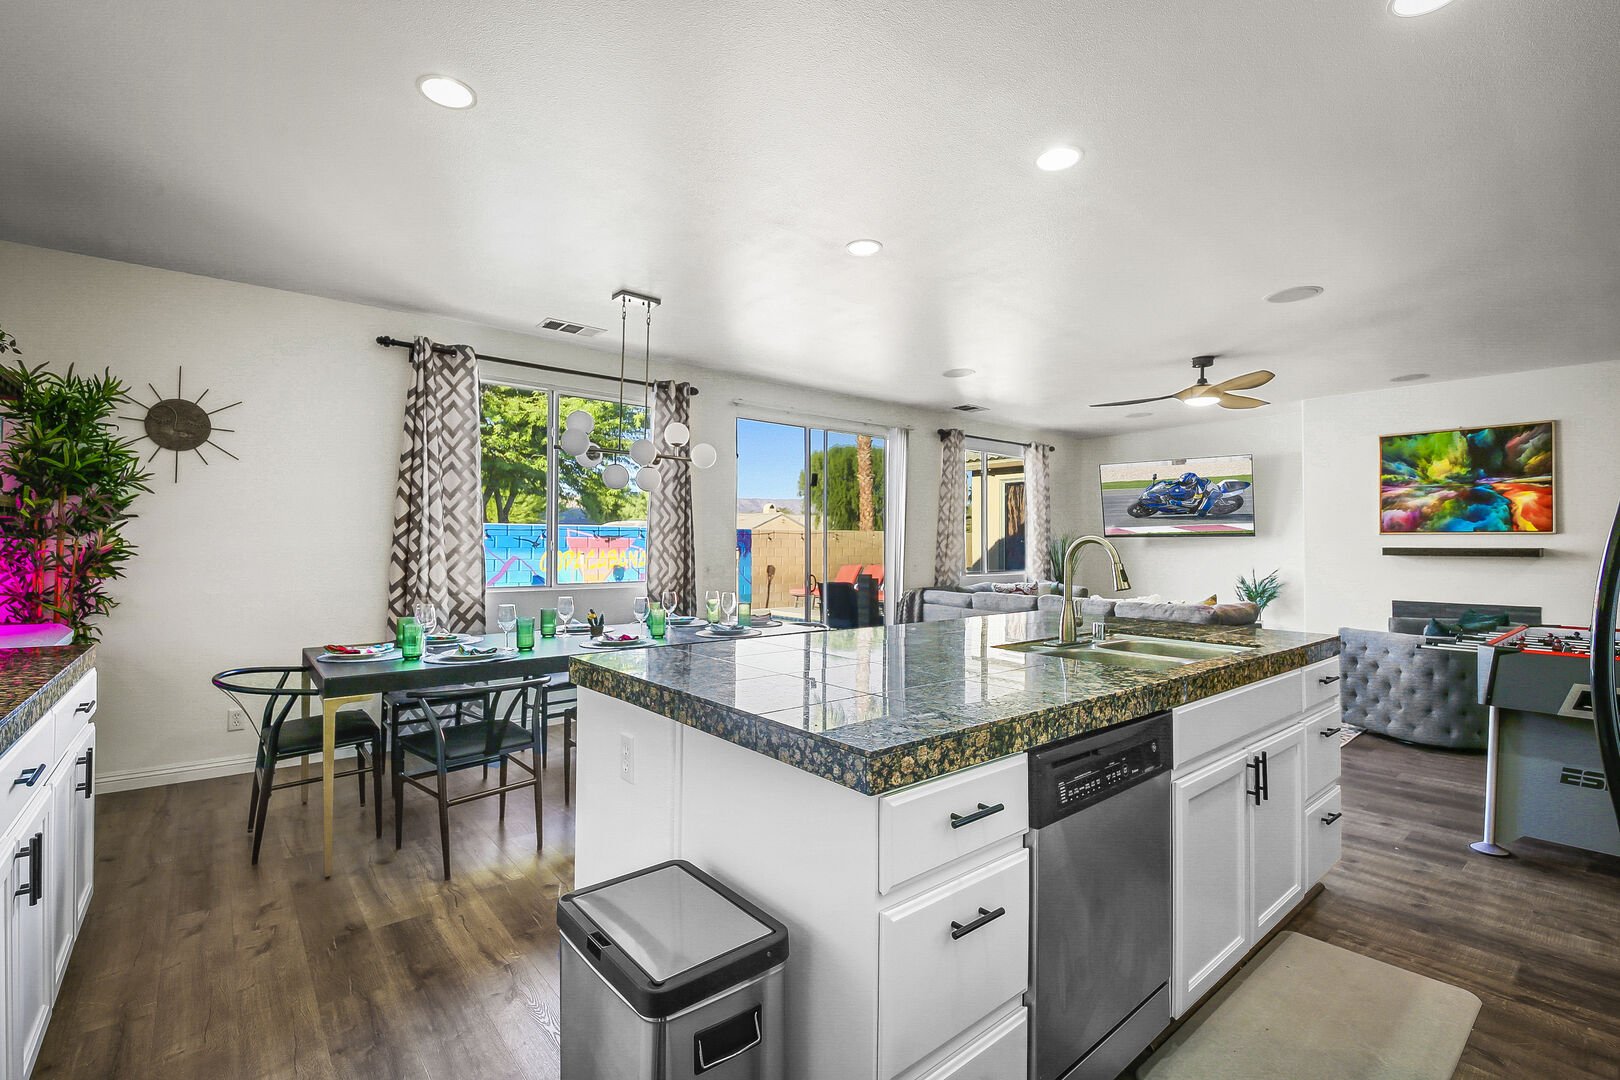 The granite countertops help for easy clean up!